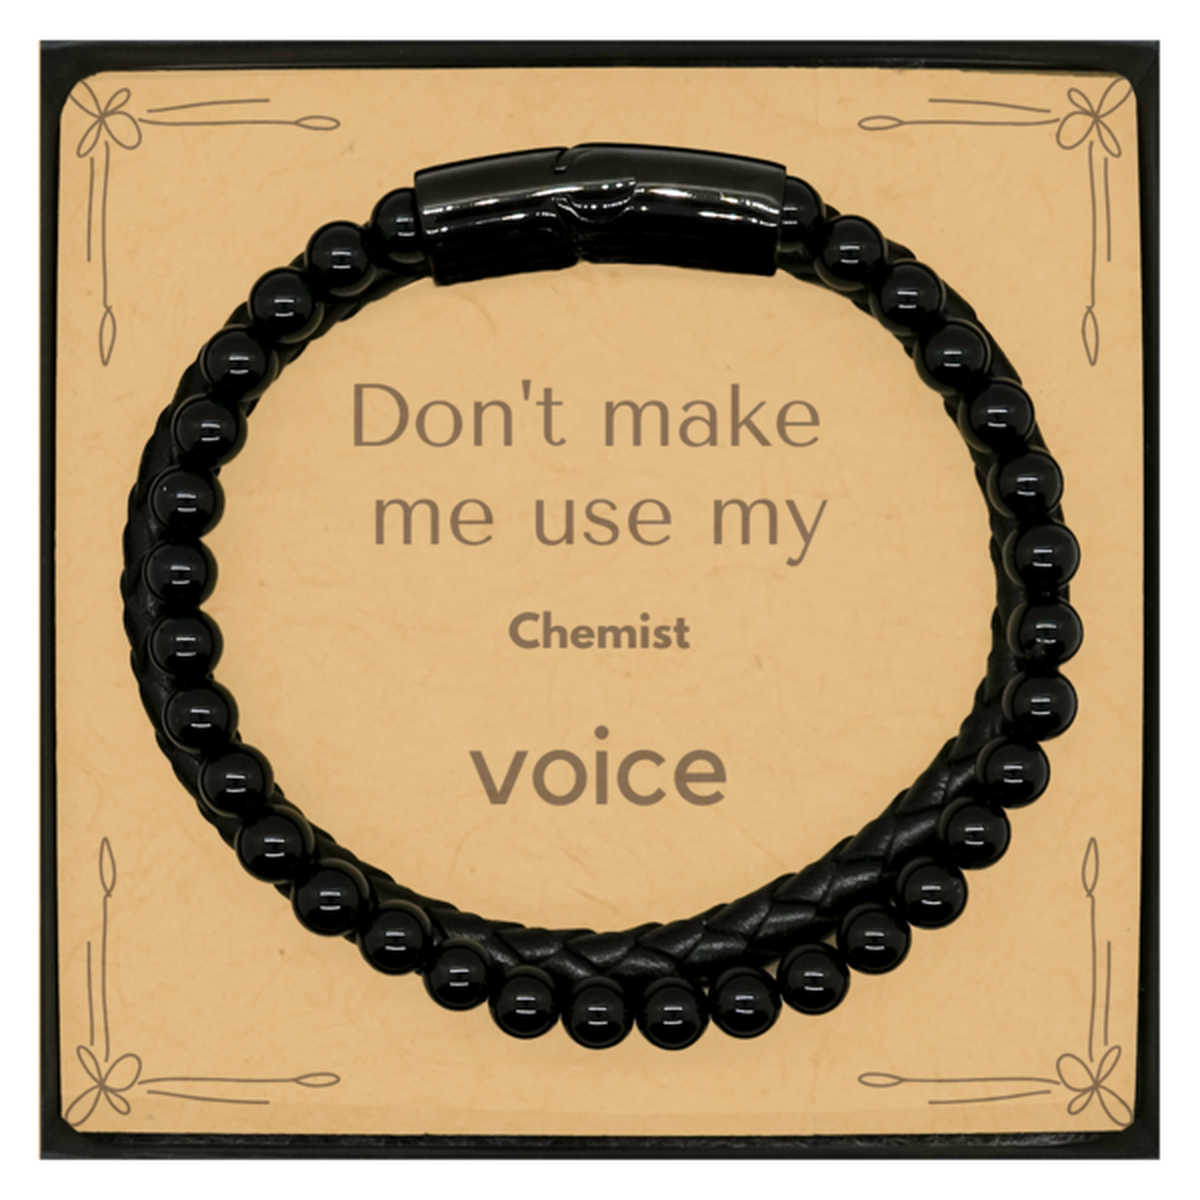 Don't make me use my Chemist voice, Sarcasm Chemist Card Gifts, Christmas Chemist Stone Leather Bracelets Birthday Unique Gifts For Chemist Coworkers, Men, Women, Colleague, Friends